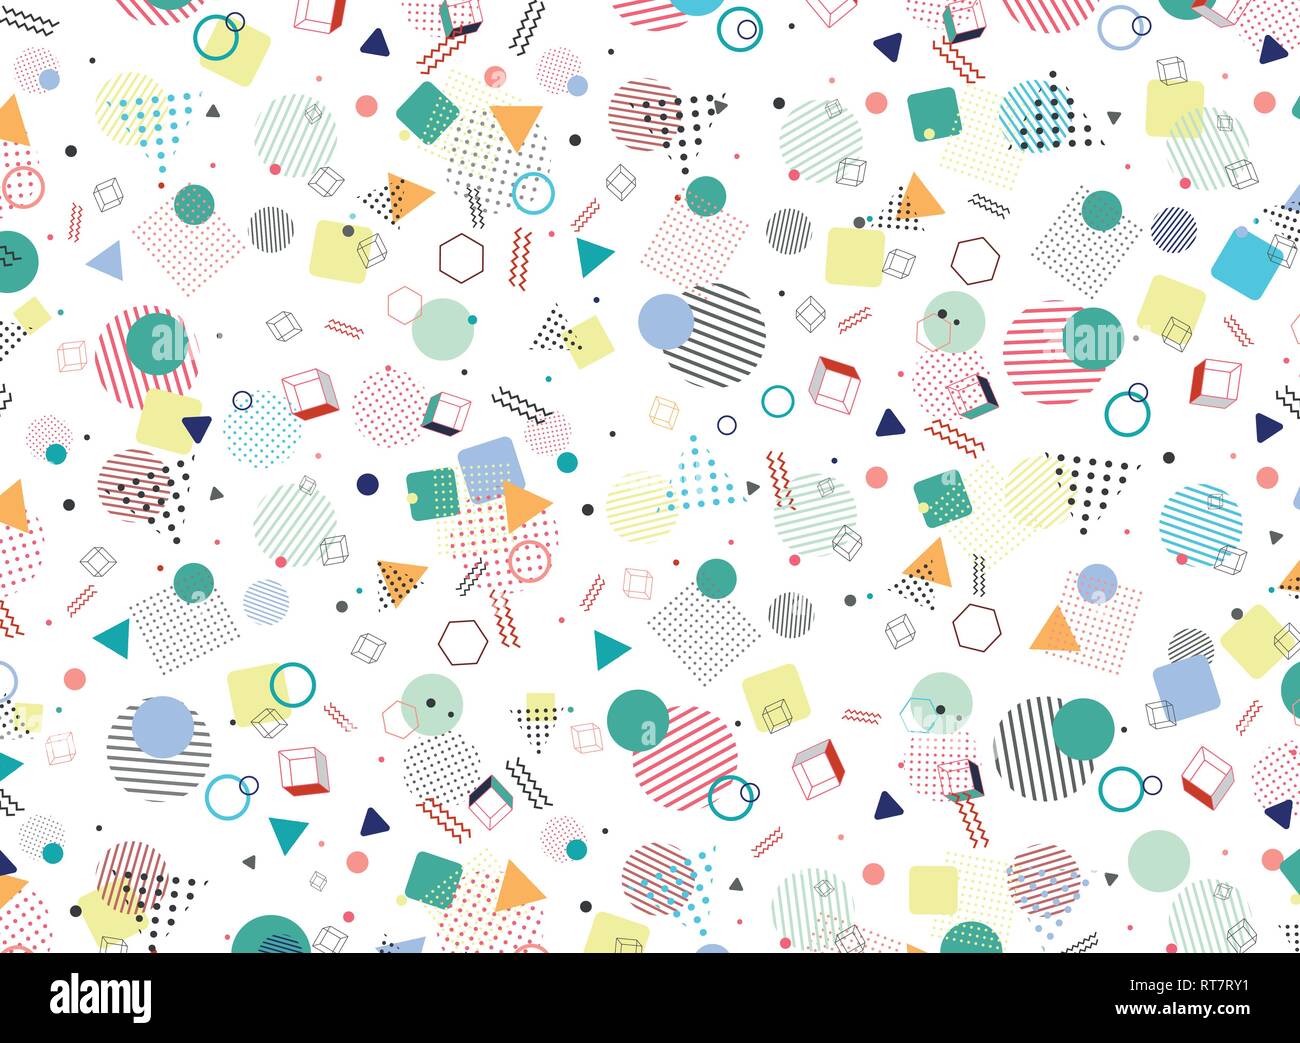 Modern Memphis geometric colorful pattern style shape background. Decorating in abstraction design artwork for ad, poster, wrapping, artwork. illustra Stock Vector